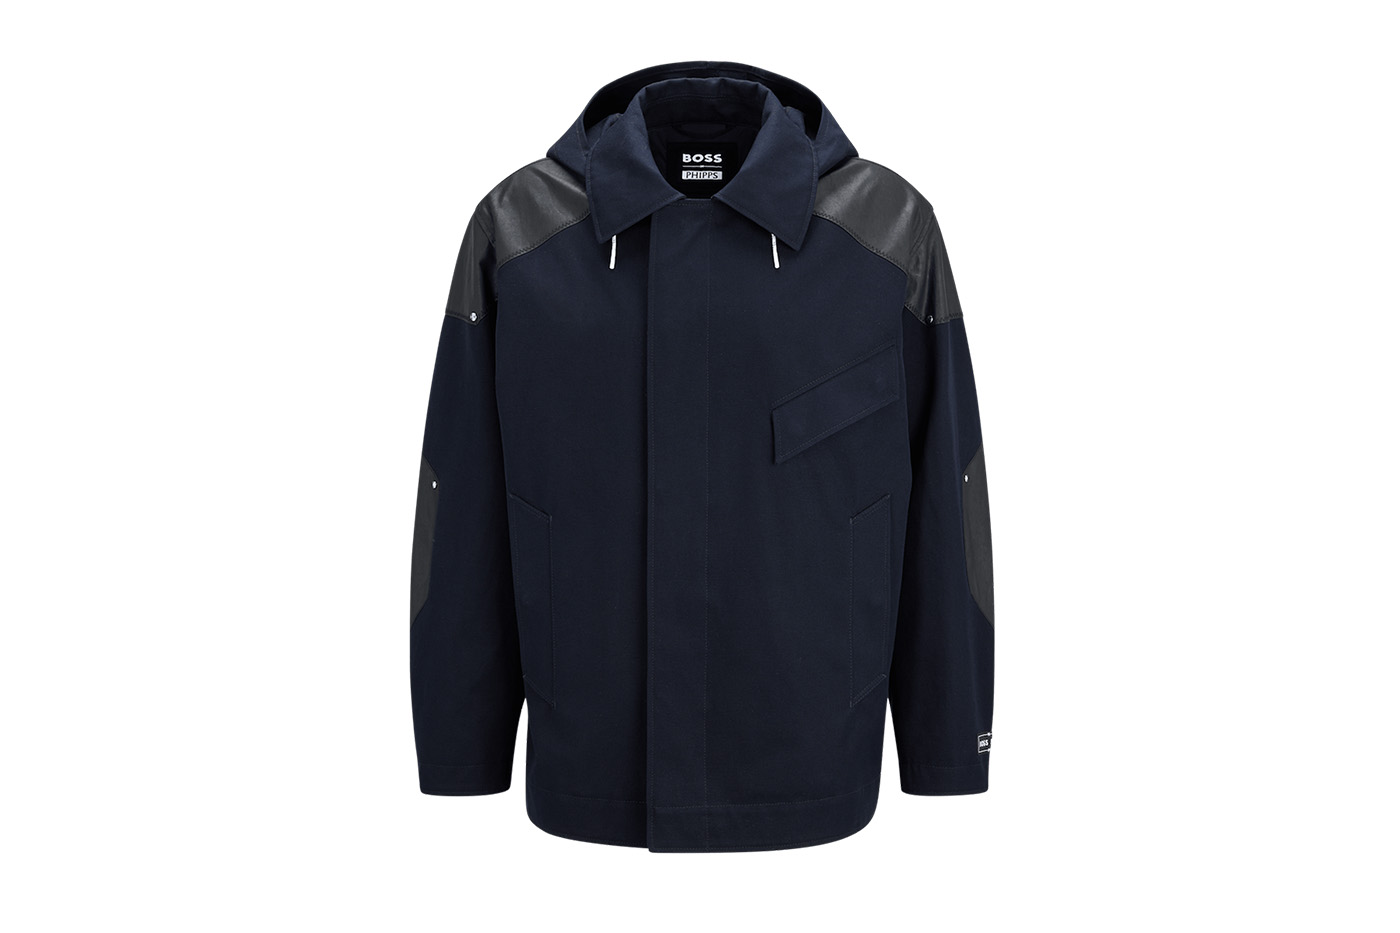 BOSS Hugo BOSS Phipps Sustainable Capsule Collection outerwear accessories 